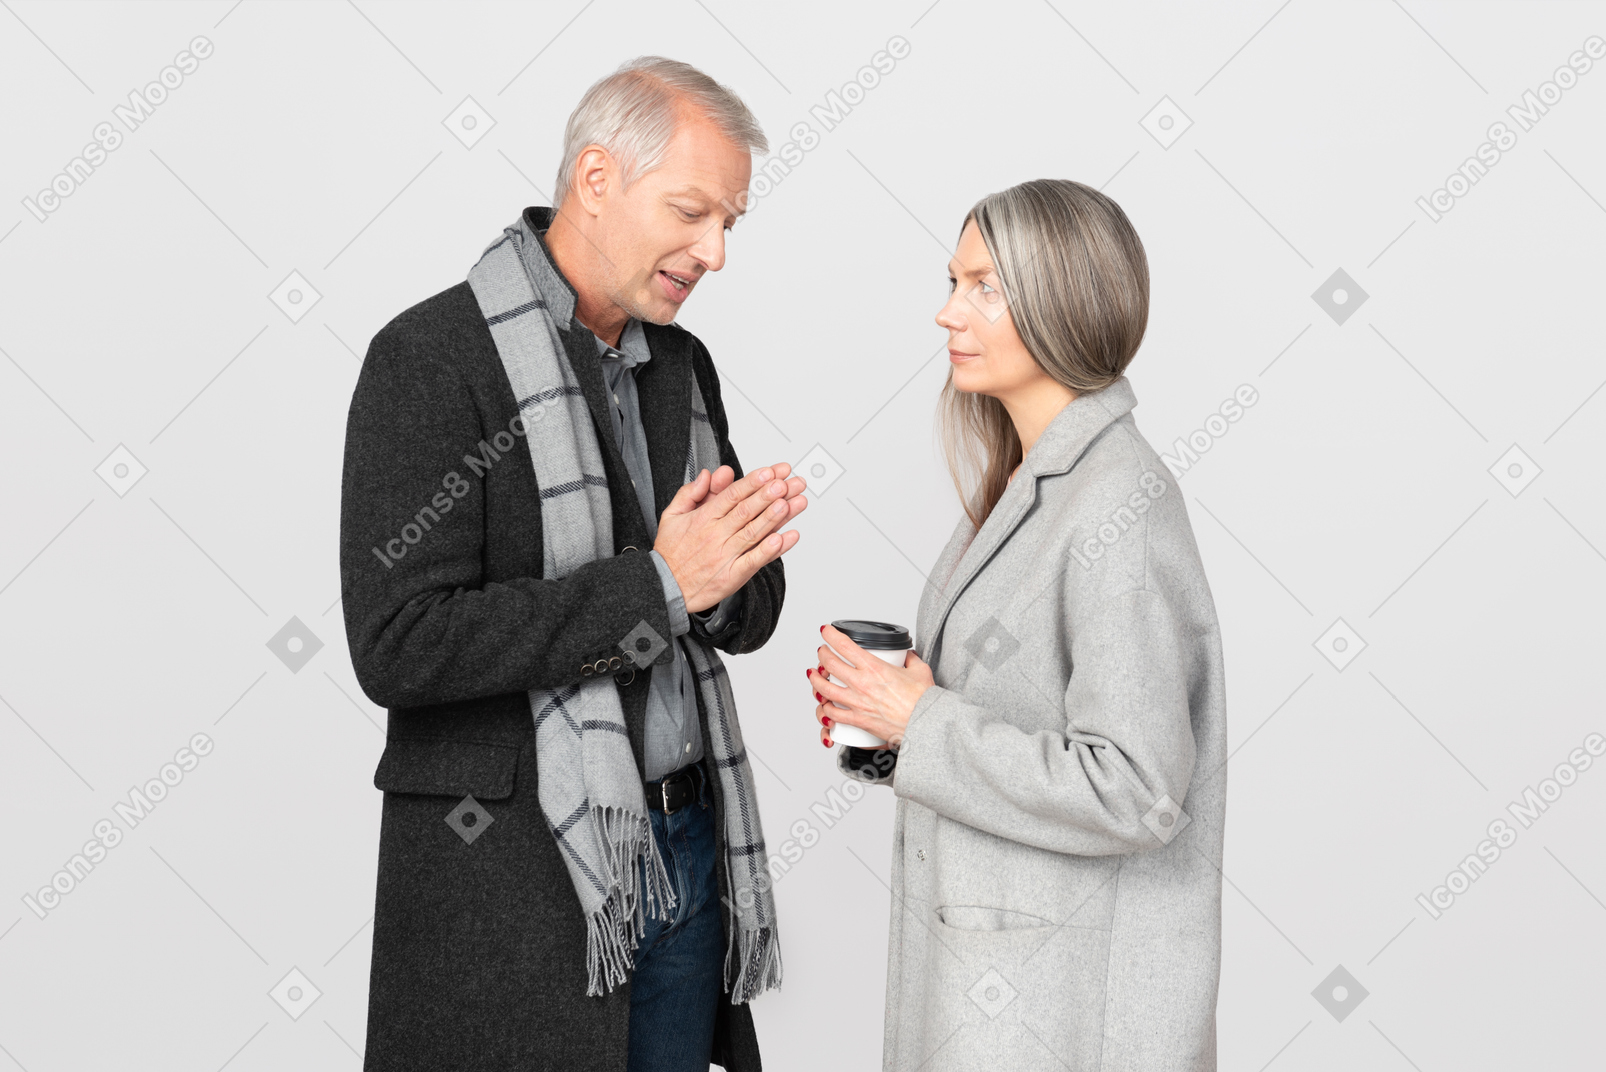 Man asking his wife to forgive him